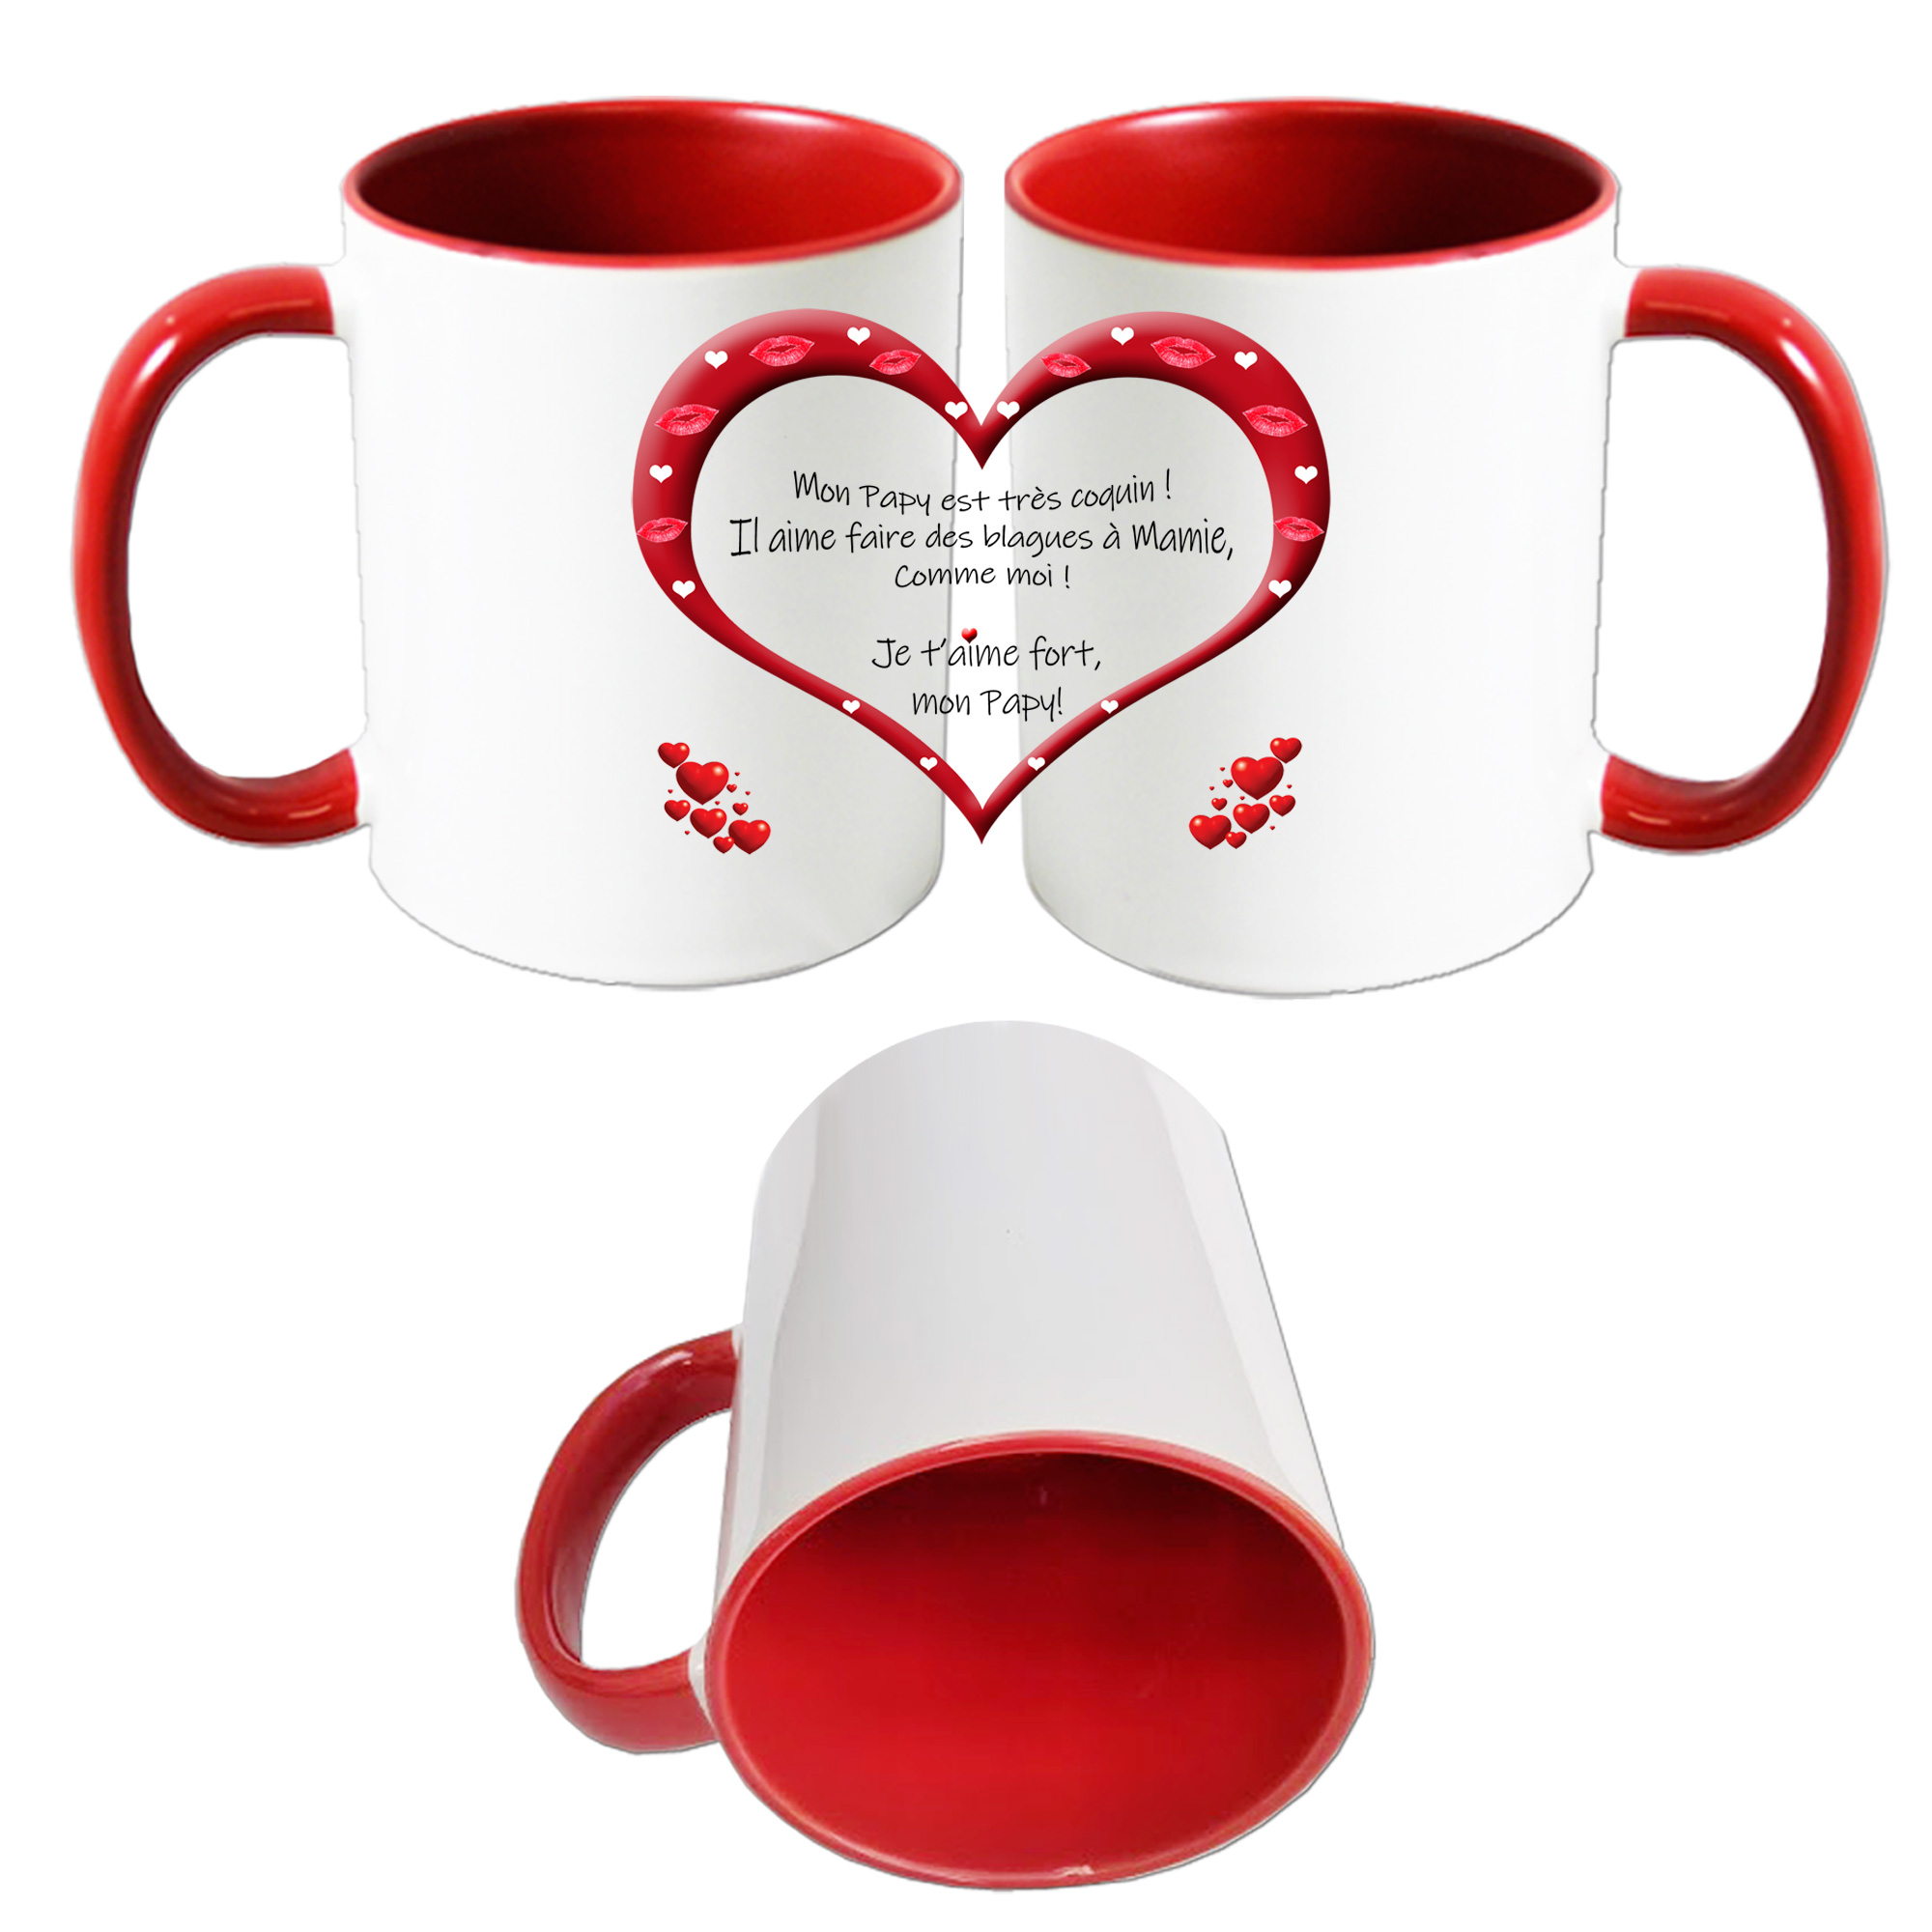 famille-papy-blague-mug-rouge-coeur-phrase-poeme-isabelle-thomas